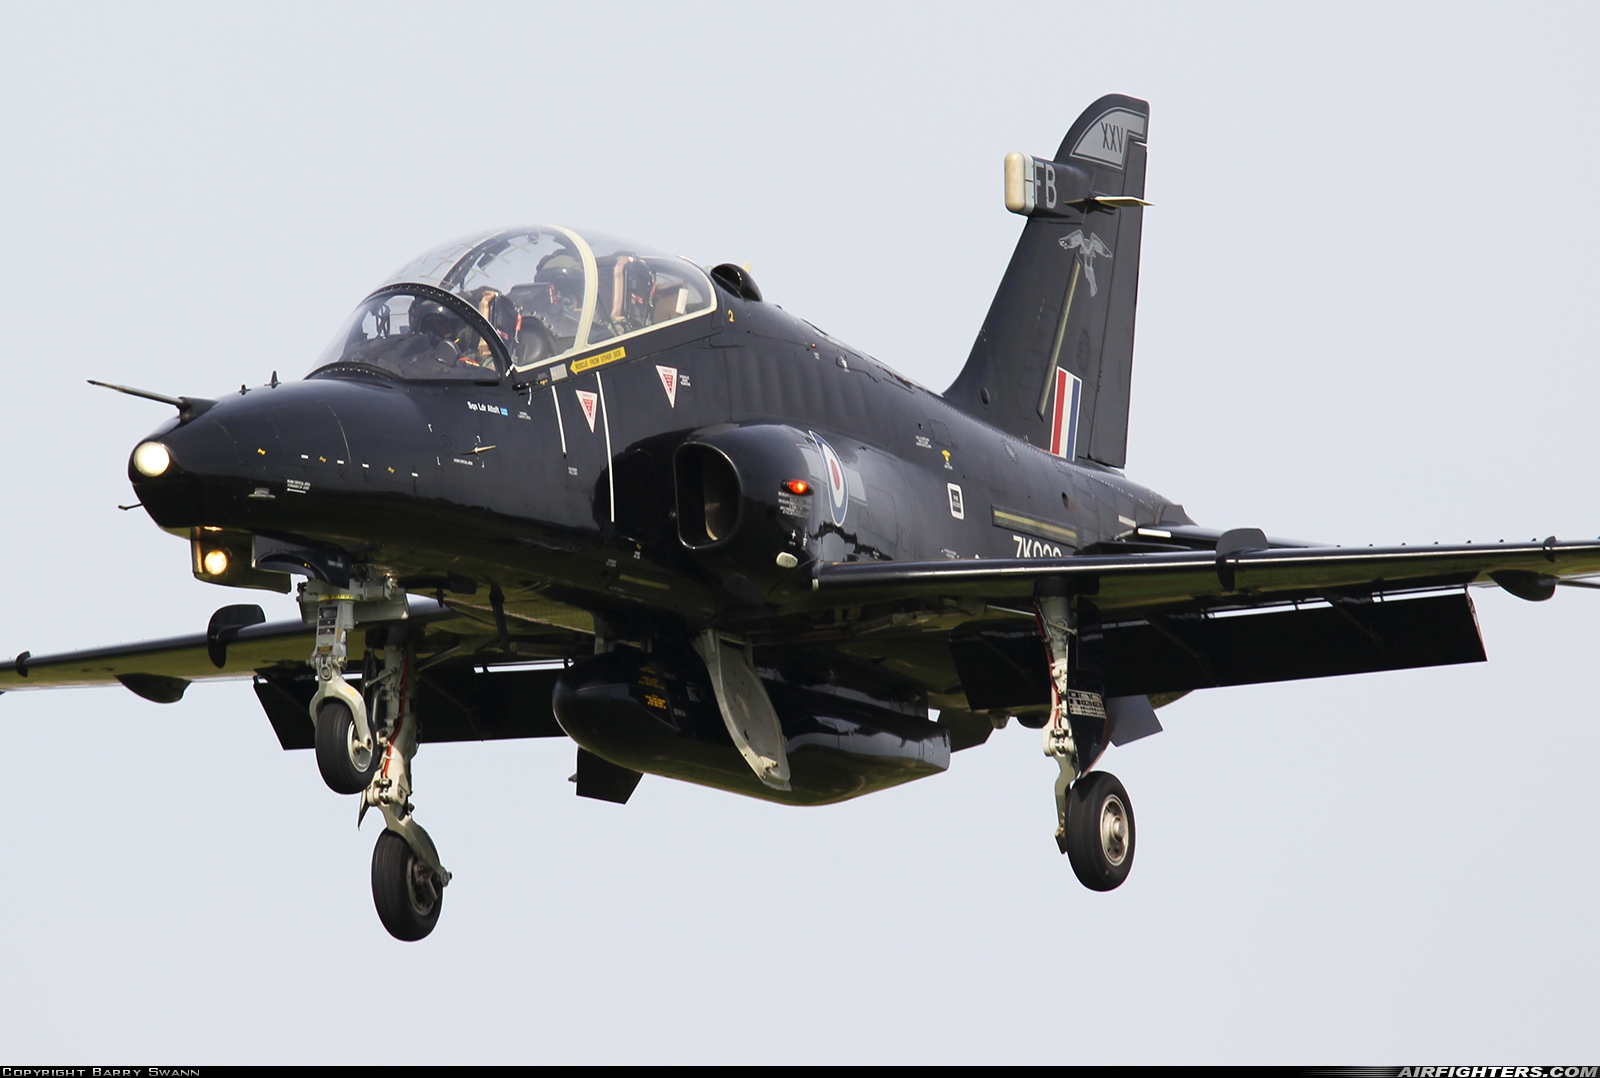 UK - Air Force BAE Systems Hawk T.2 ZK026 at Valley (EGOV), UK